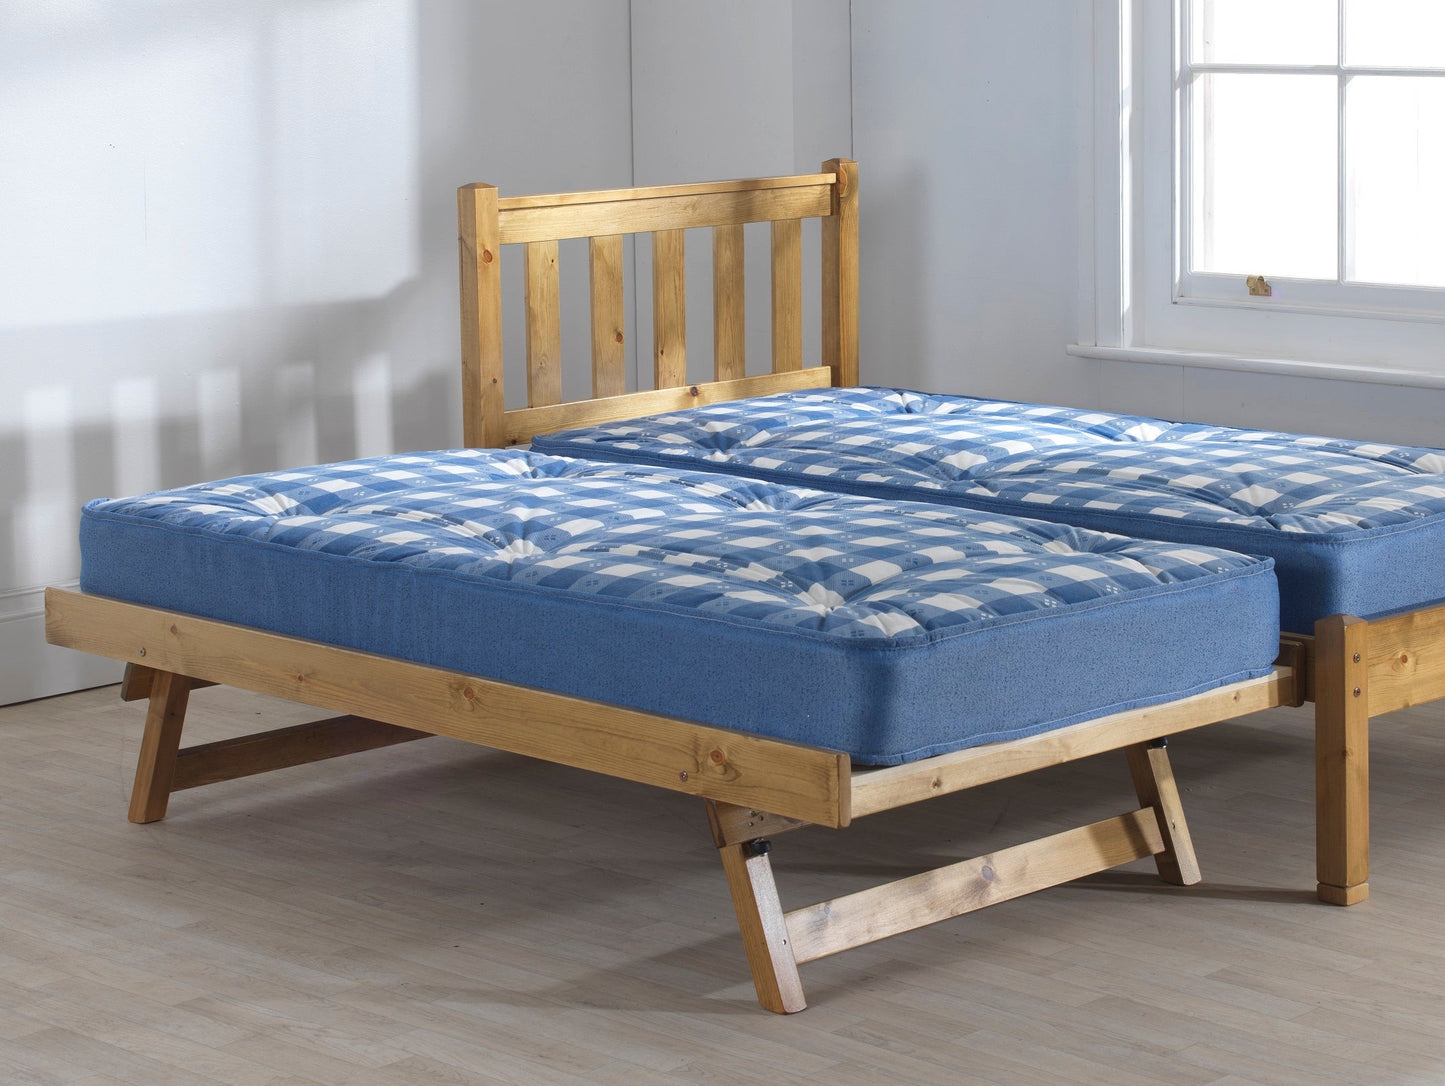 Shaker Guest Bed